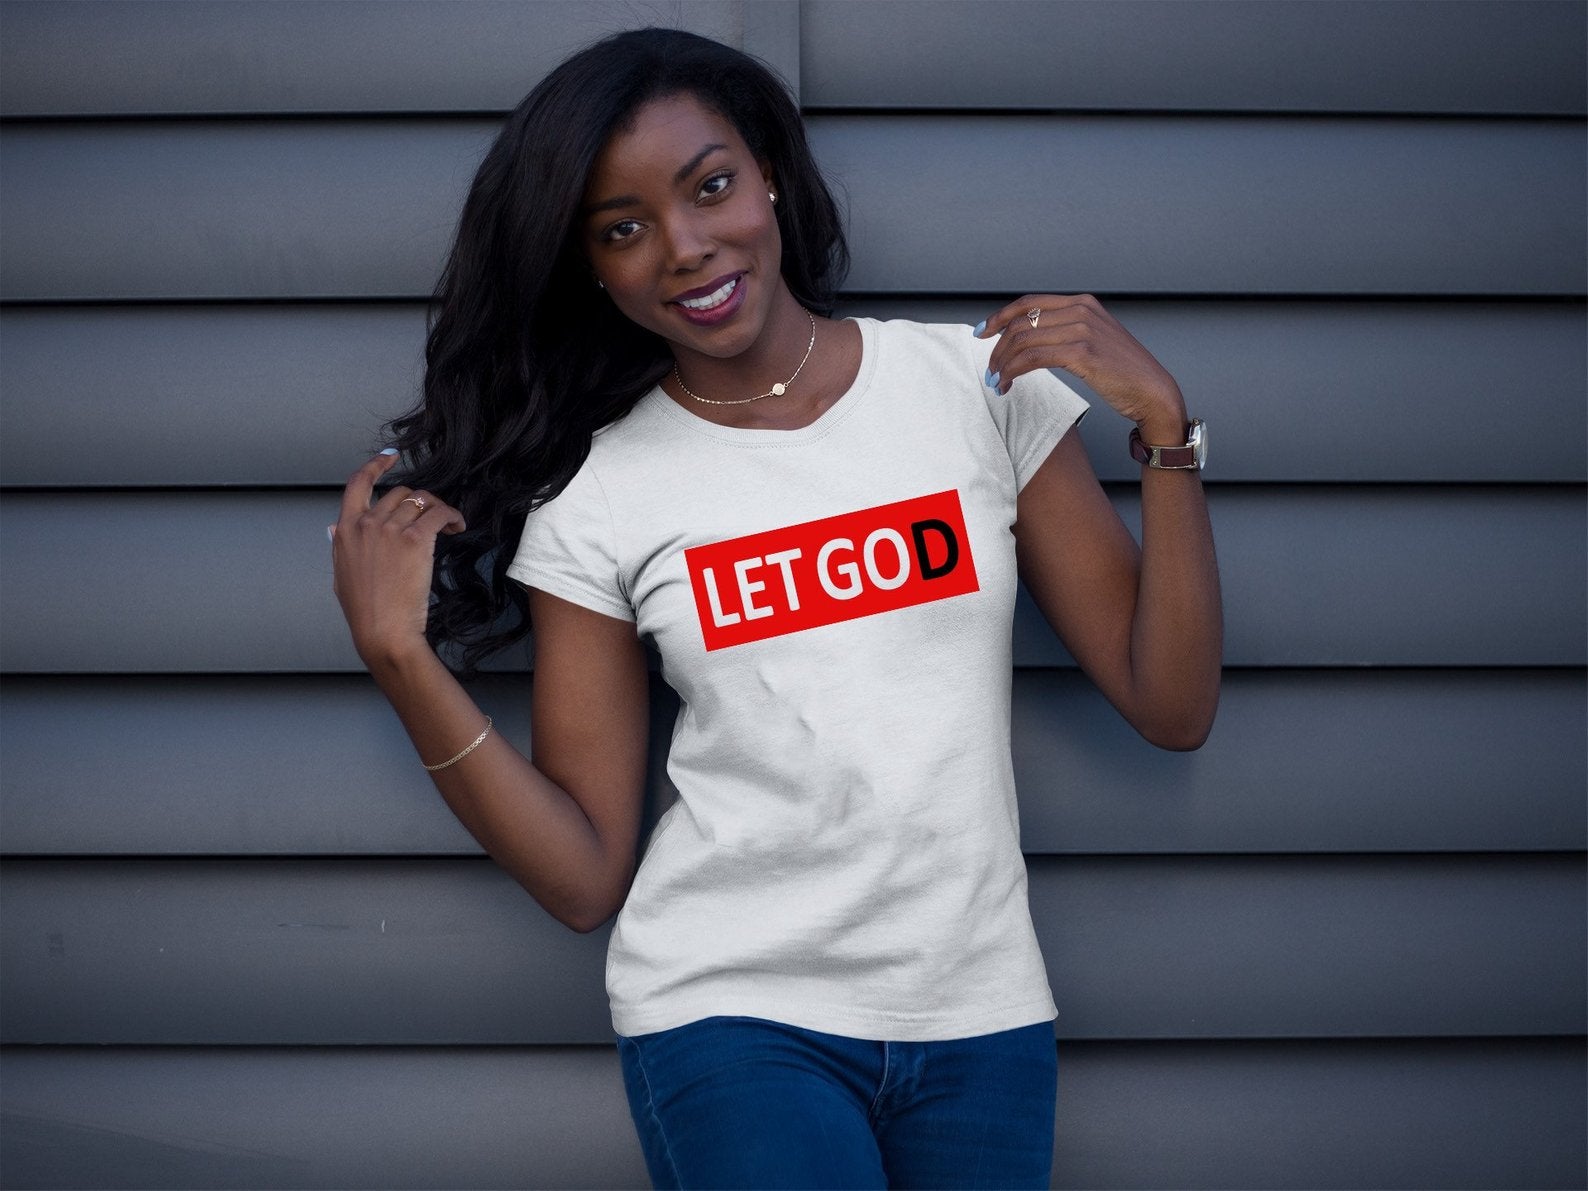 Lift His Name On High With These Fierce Faith-Based T-Shirts